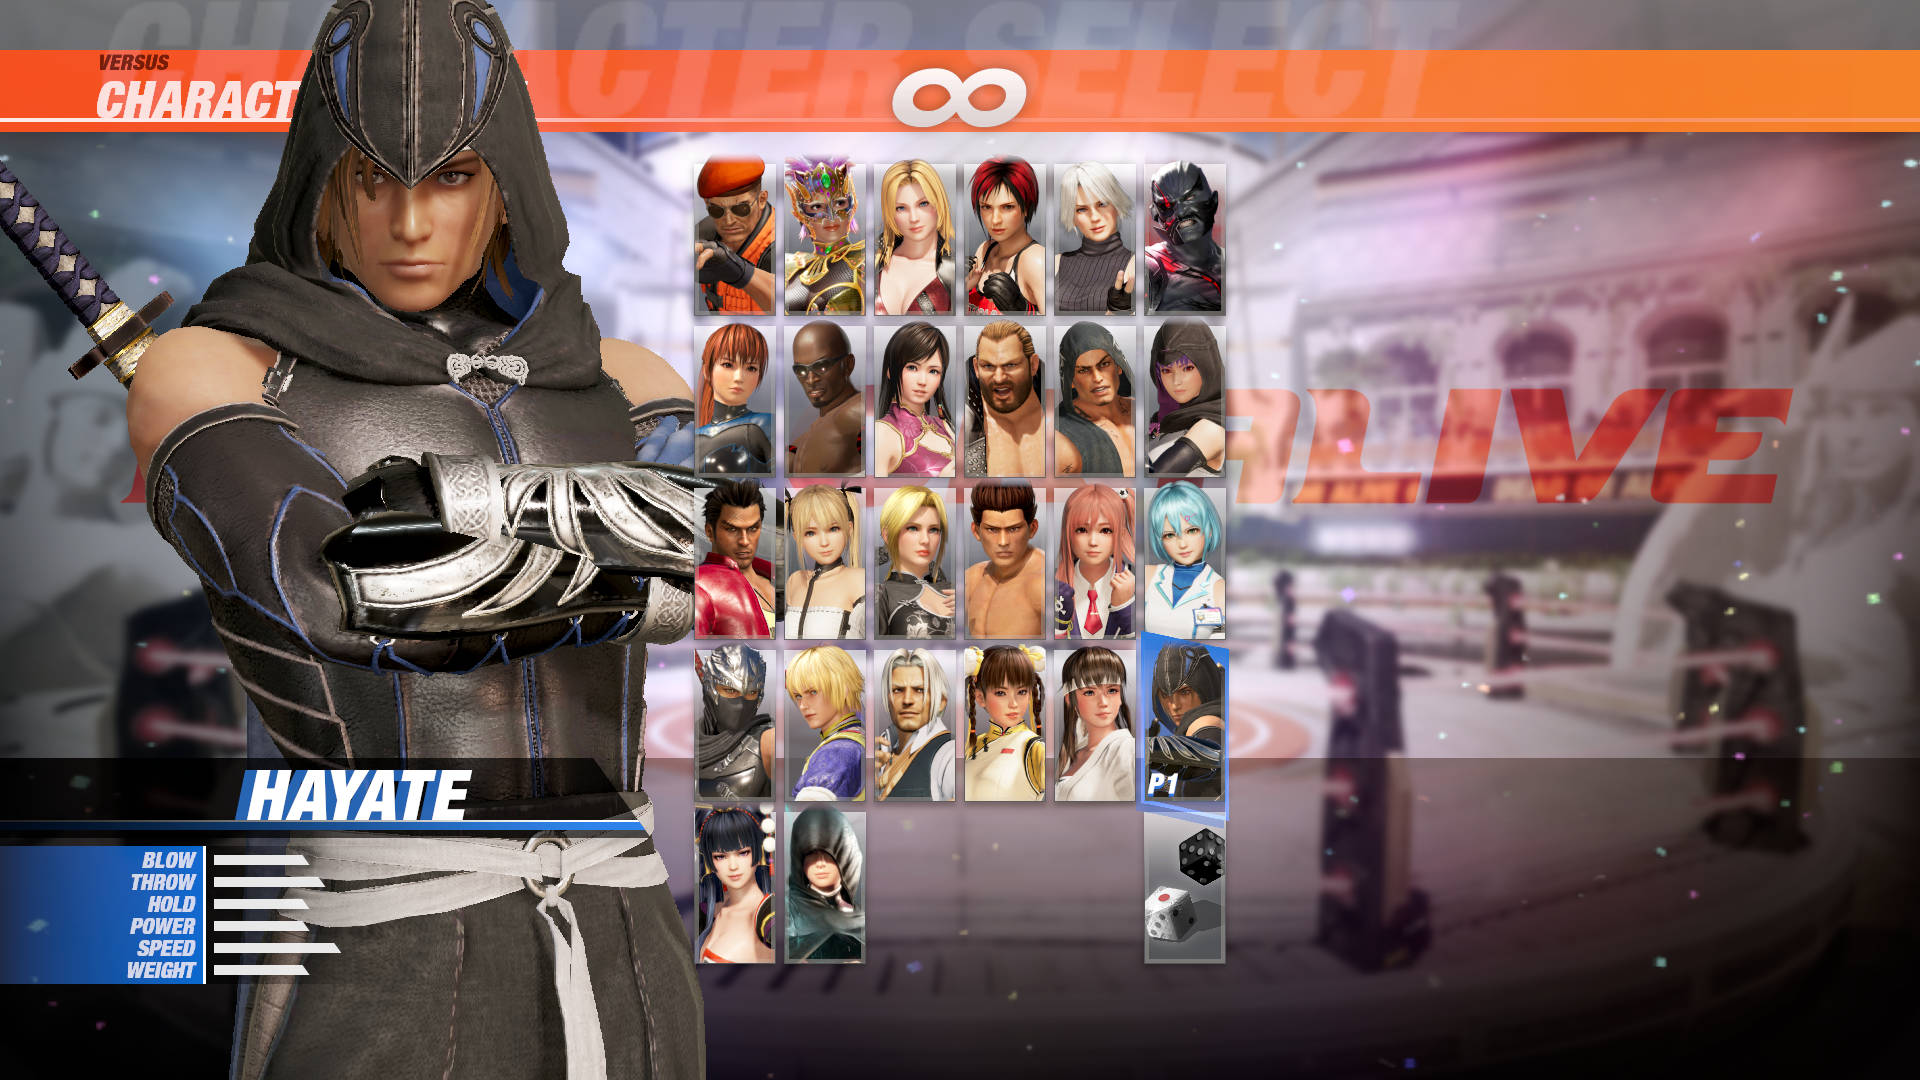 DEAD OR ALIVE 6: Core Fighters - Male Fighters Set Featured Screenshot #1